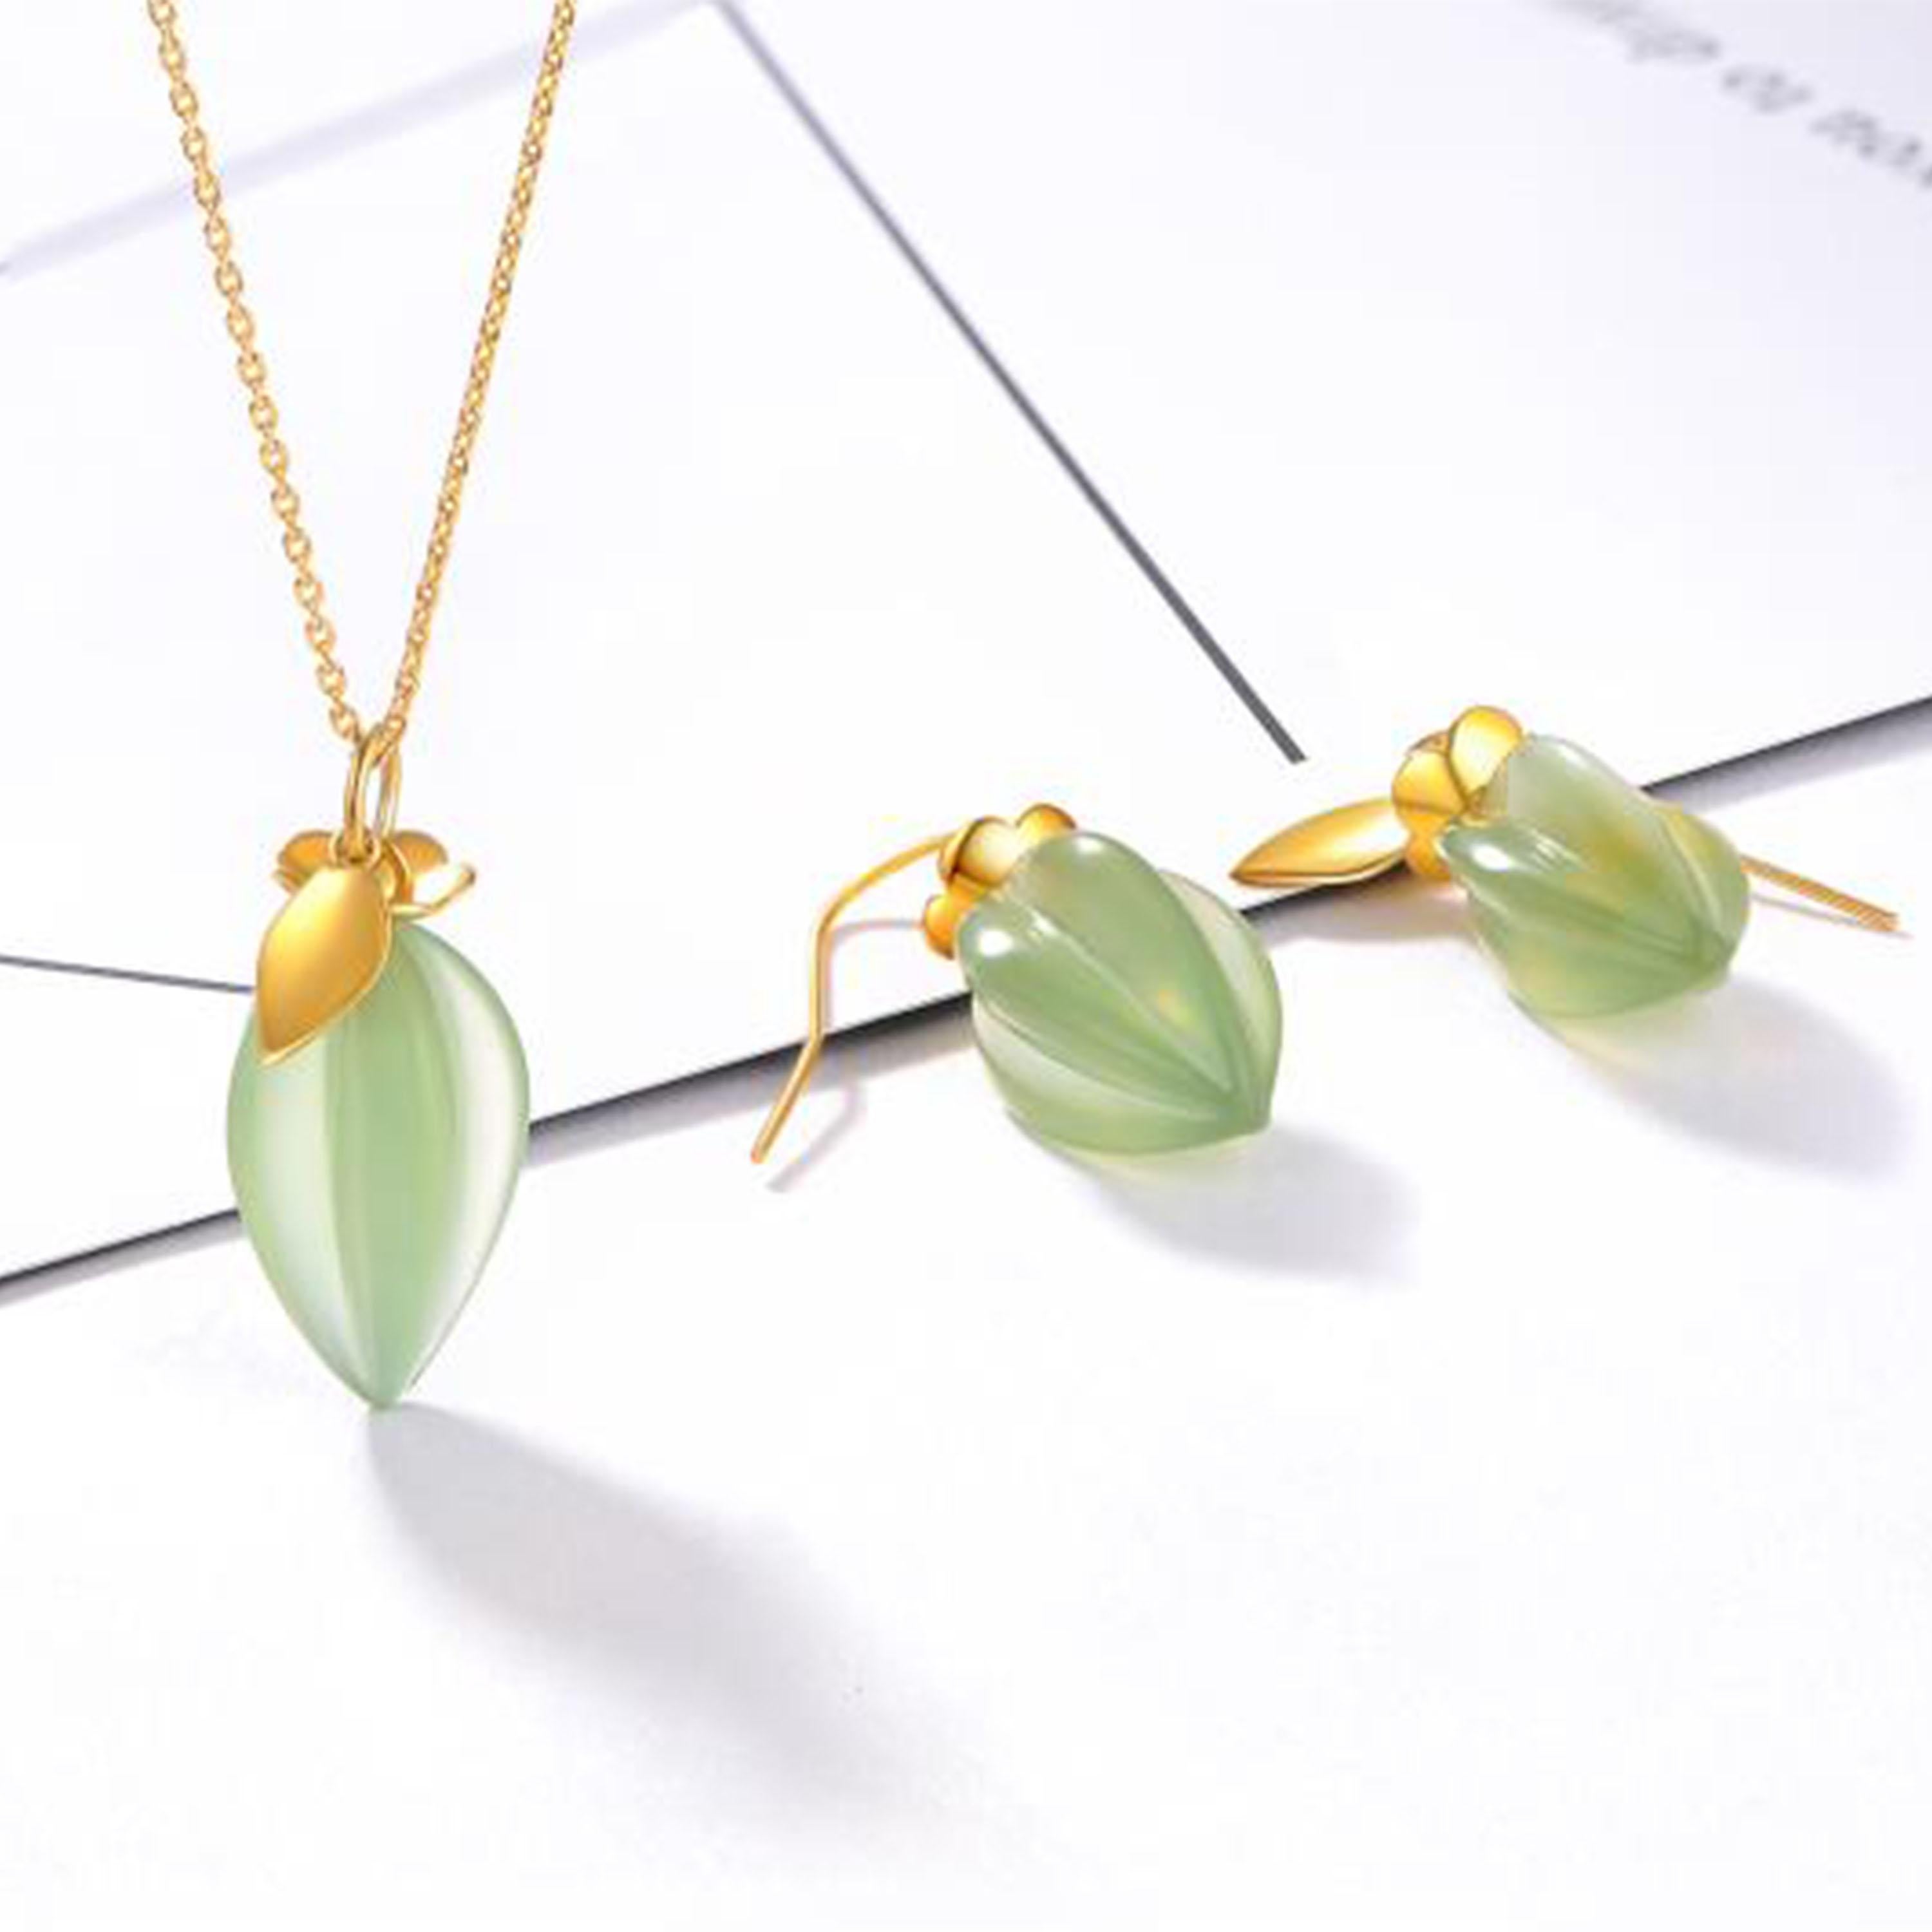 Description:
A charming earrings and necklace set featuring serpentine jade shaped like the tropical star fruits, adorned with delicate petals of 18ct gold plate on sterling silver.

Specification:
Size (LxW): earrings = 28mm x 10mm, pendant = 25mm